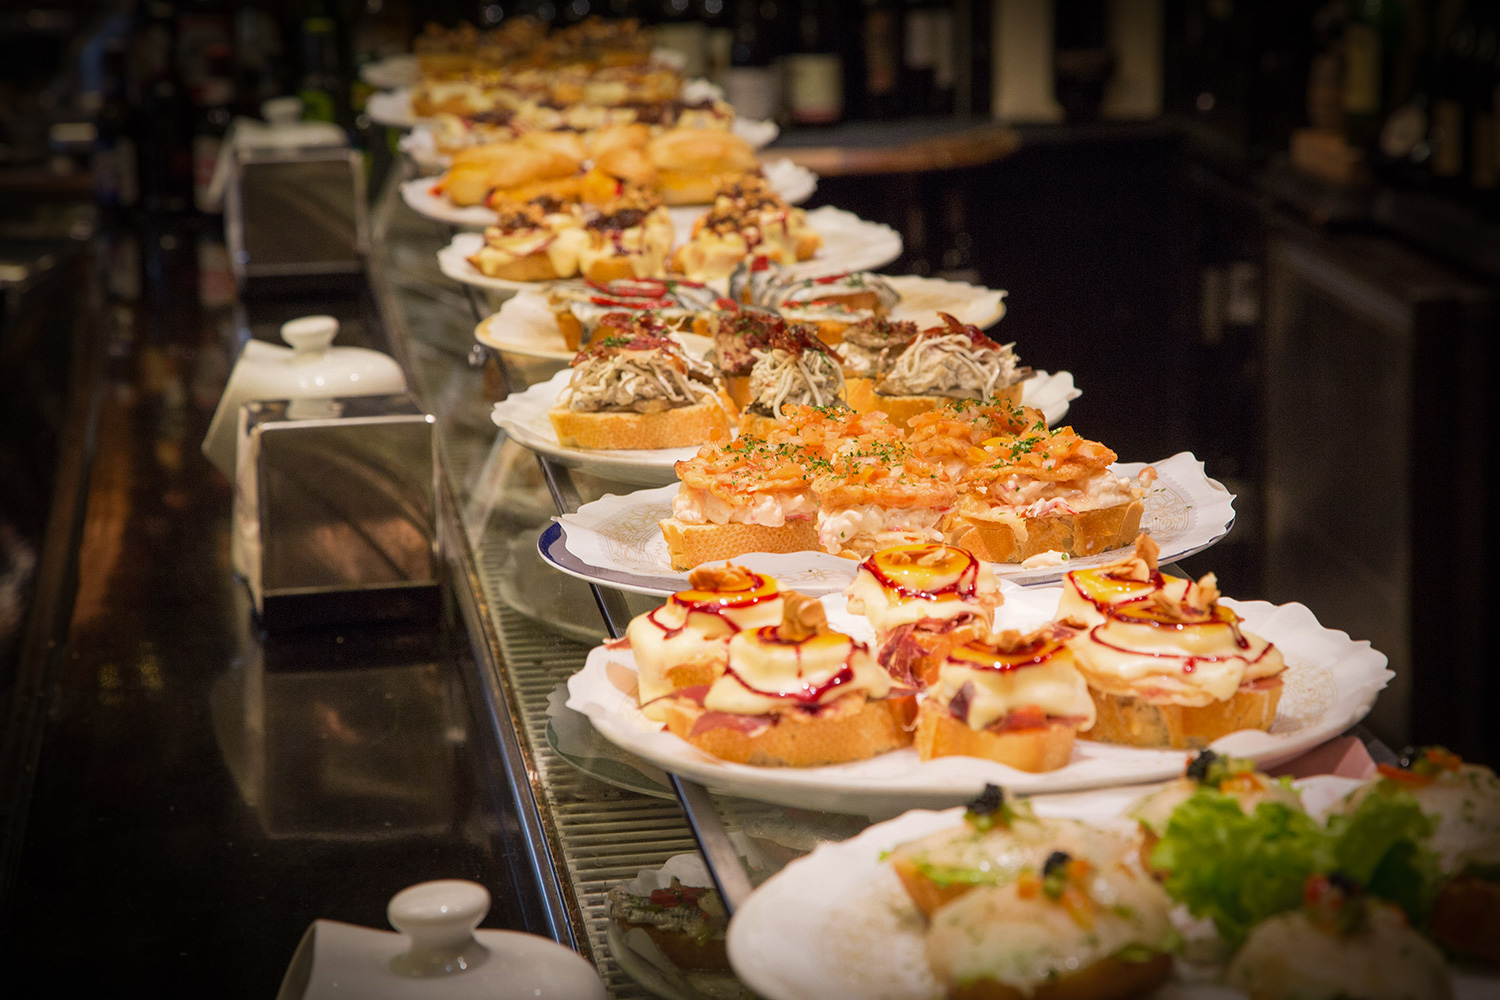 At Plaza Nueva in Bilbao's Old Town, you can hop from bar to bar and sample pintxos.